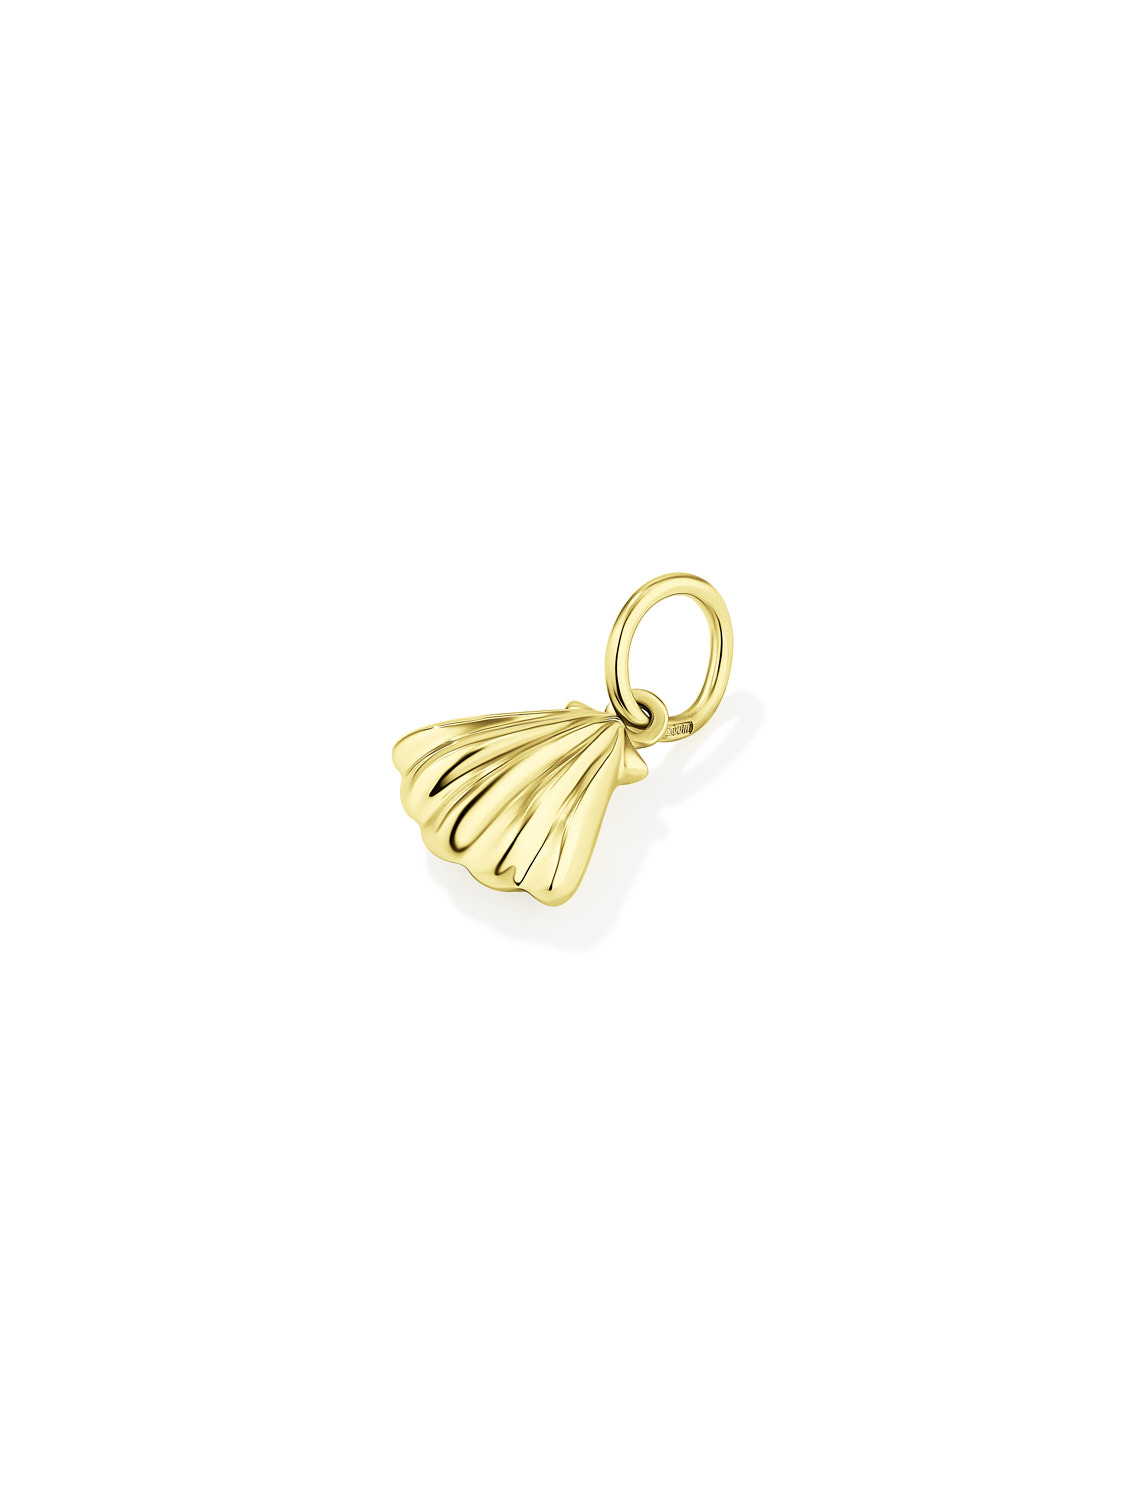 SCALLOP TRINKET GOLD-PLATED